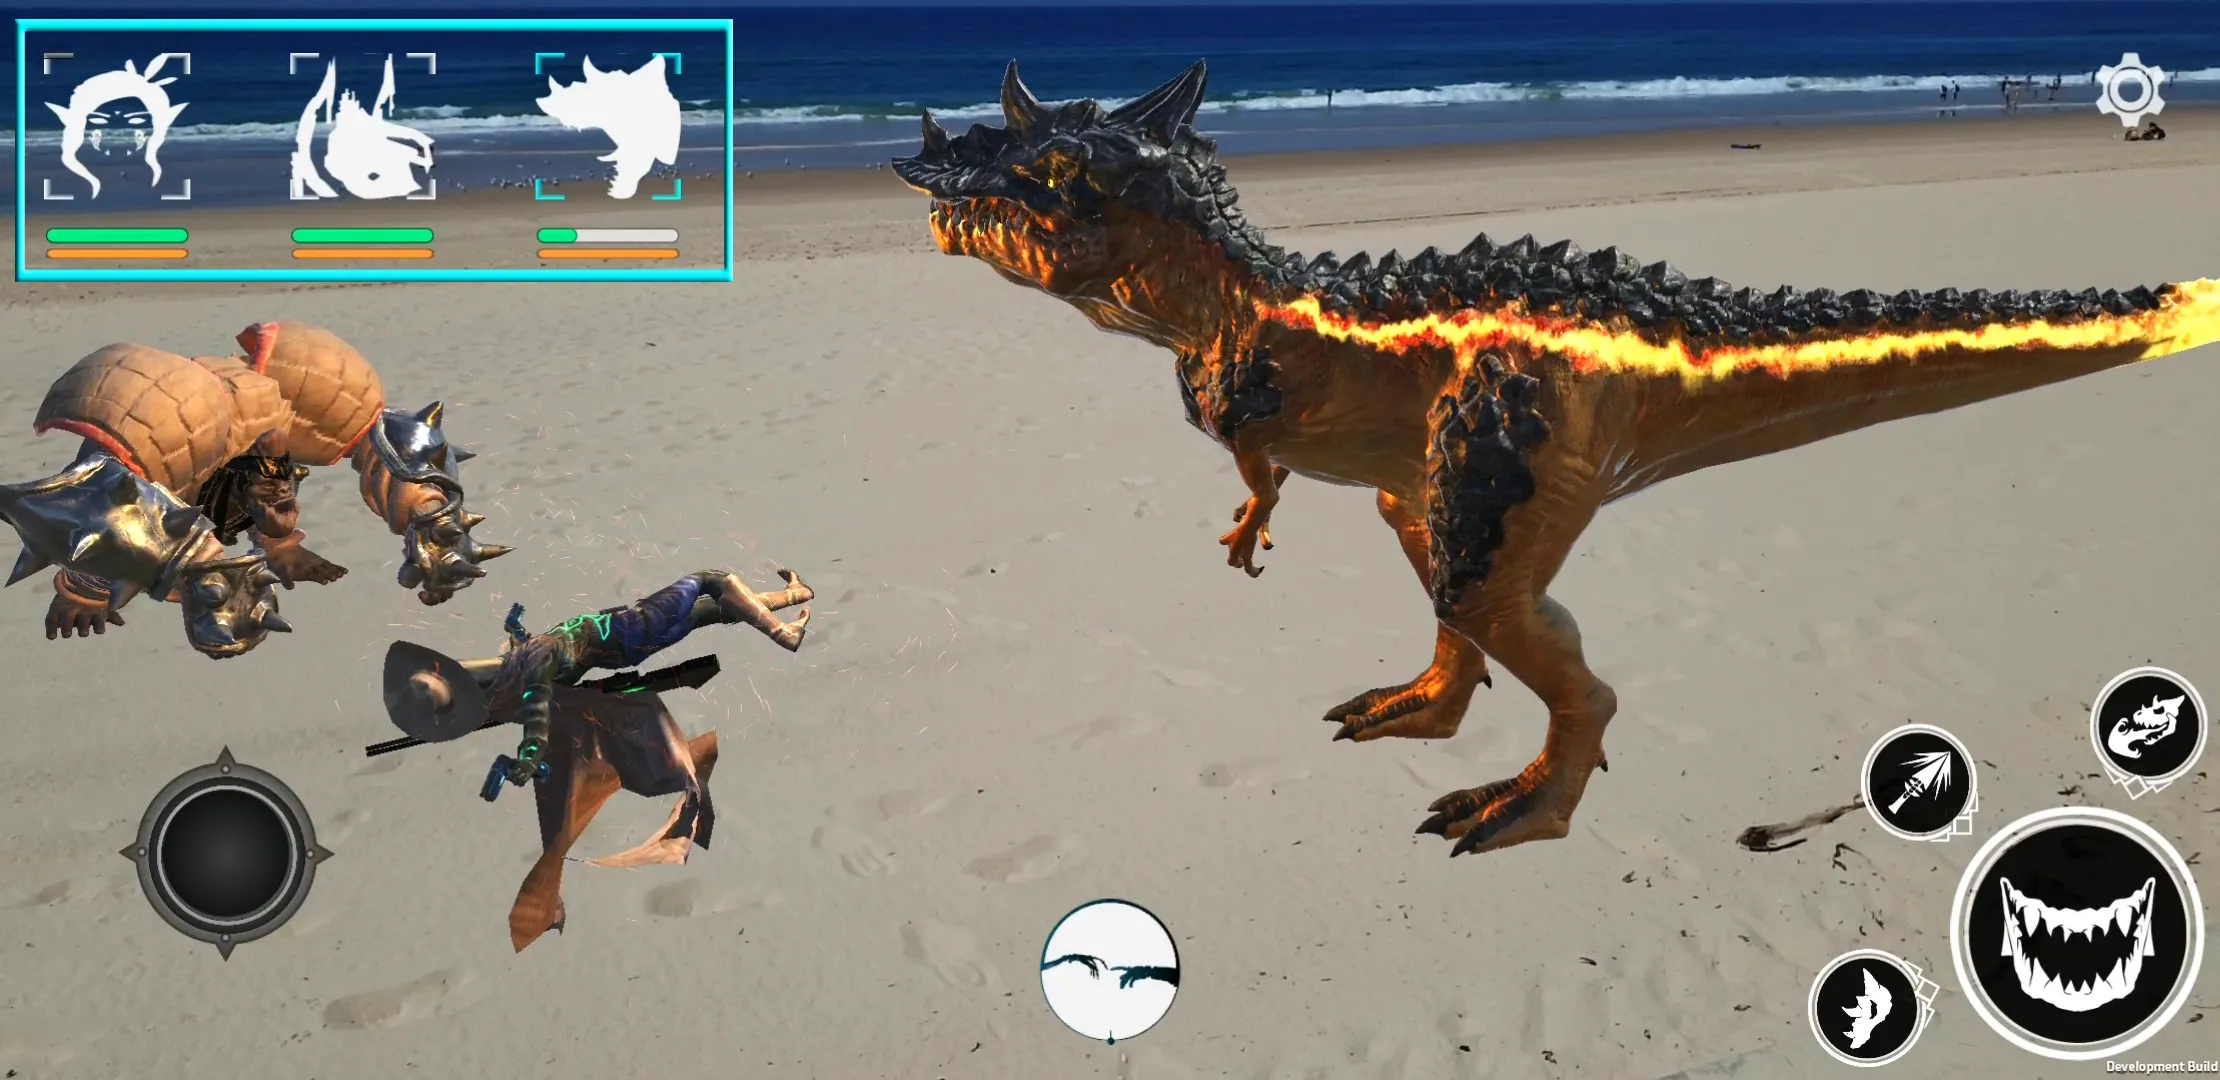 How to Play AR TCG. Giant orange dinosuar and giant armoured gorilla fighting on the beach with waves in the background.